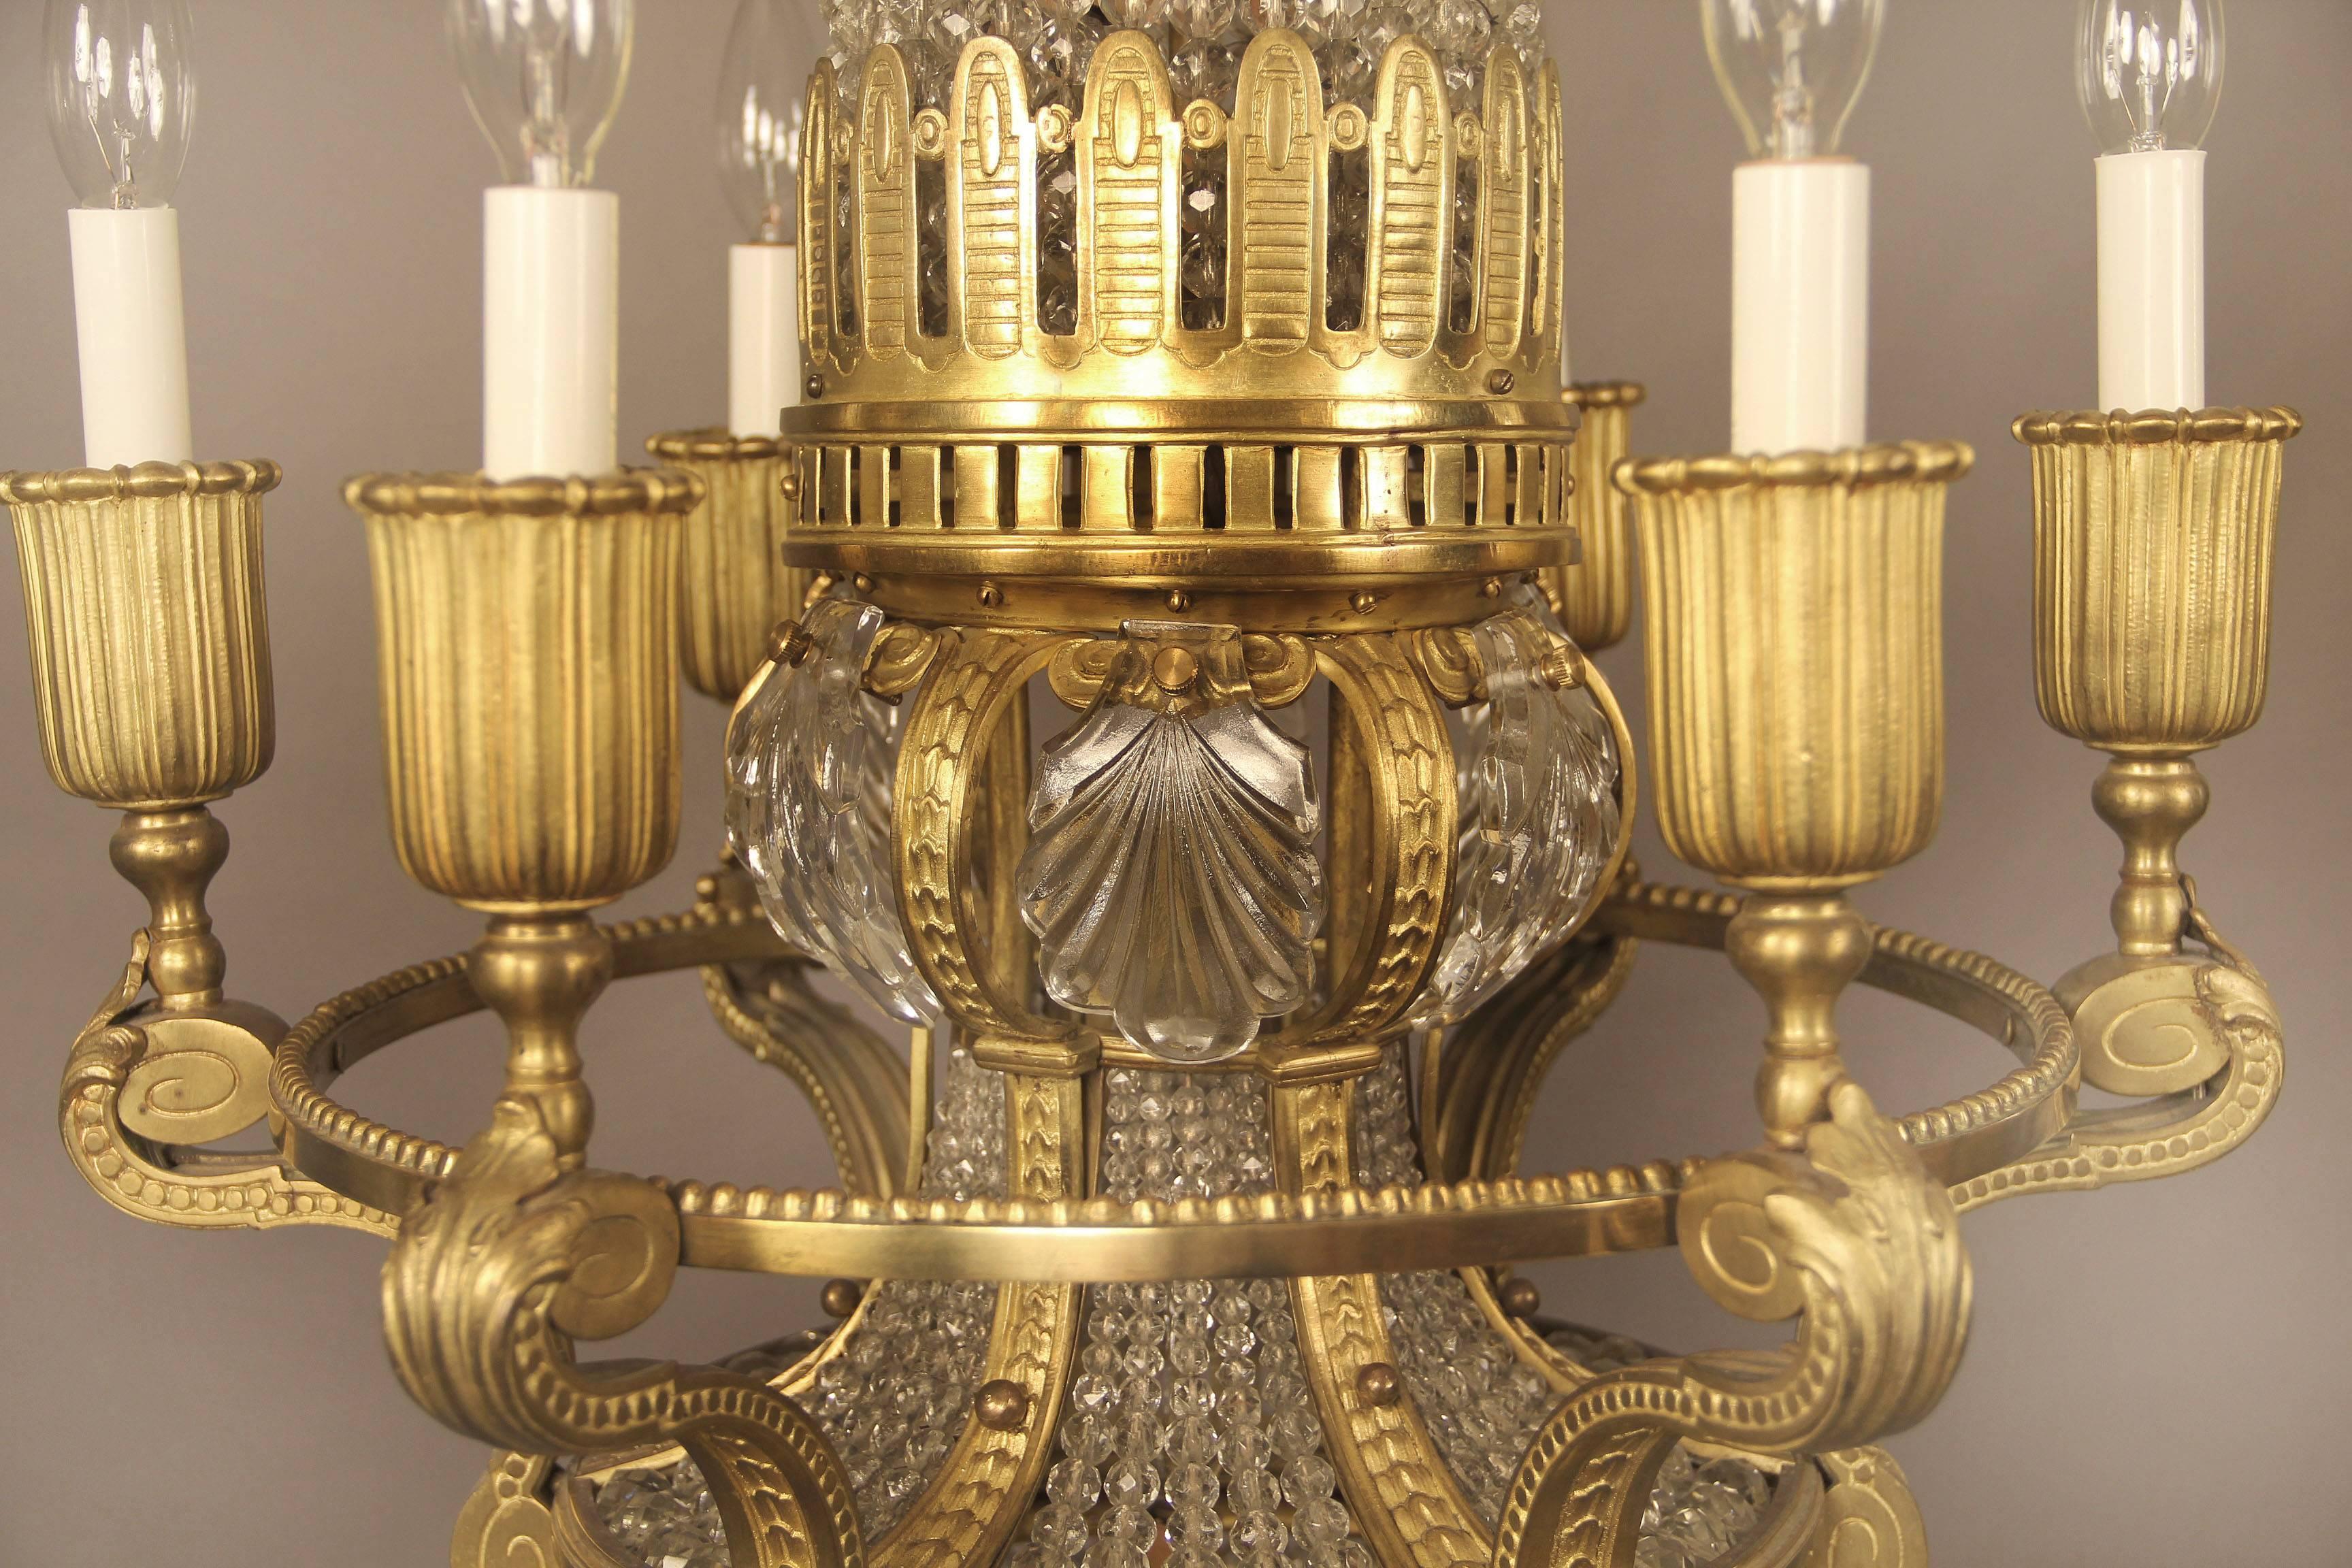 An interesting late 19th century gilt bronze and crystal ten light basket chandelier

A long and narrow beaded neck and body, bronze arms leading to six perimeter lights and four-tiered interior lights.